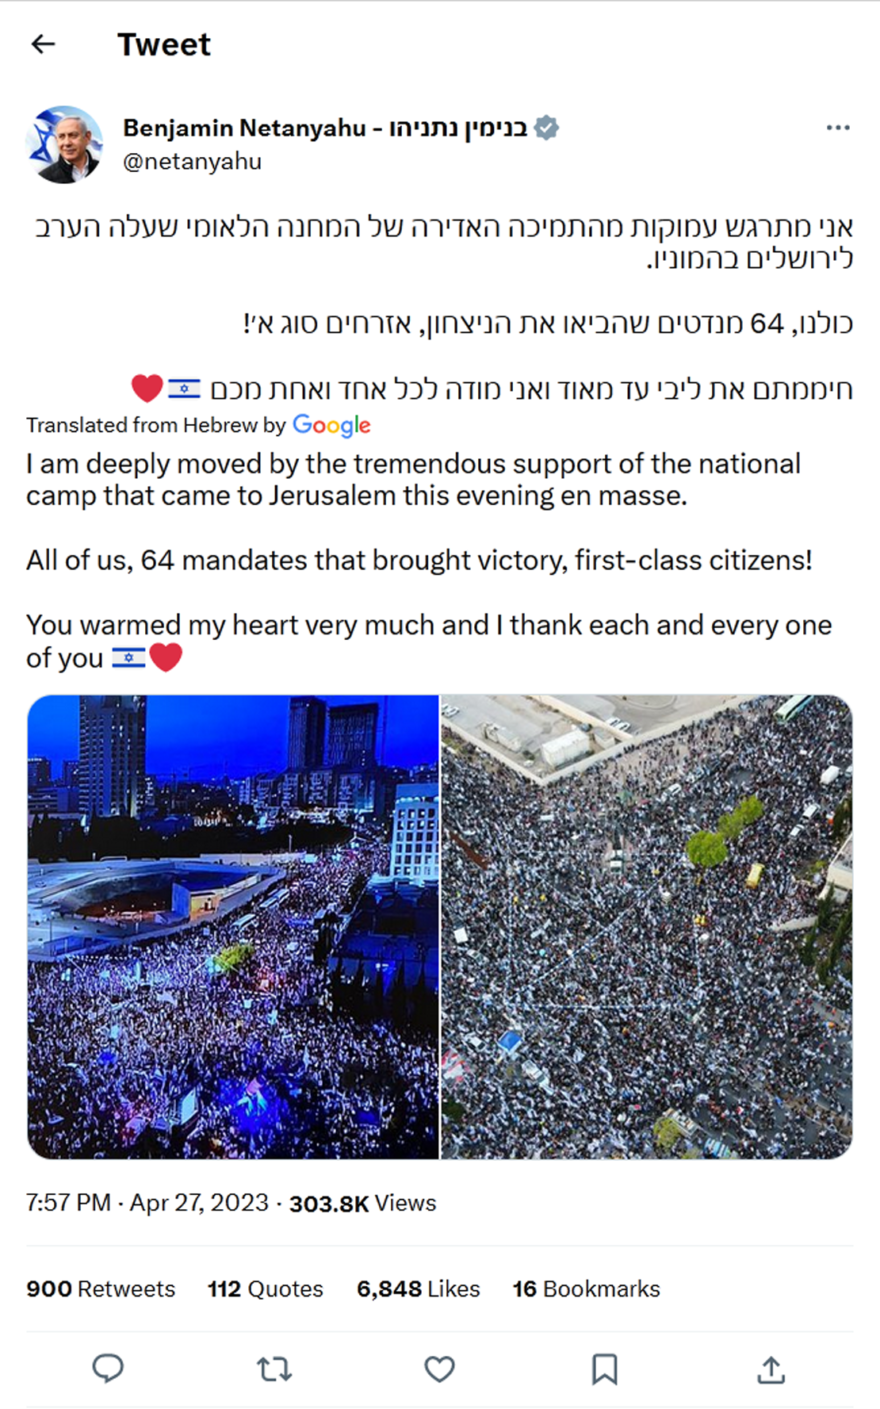 Benjamin Netanyahu-tweet-27April 2023-I am deeply moved by the tremendous support of the national camp